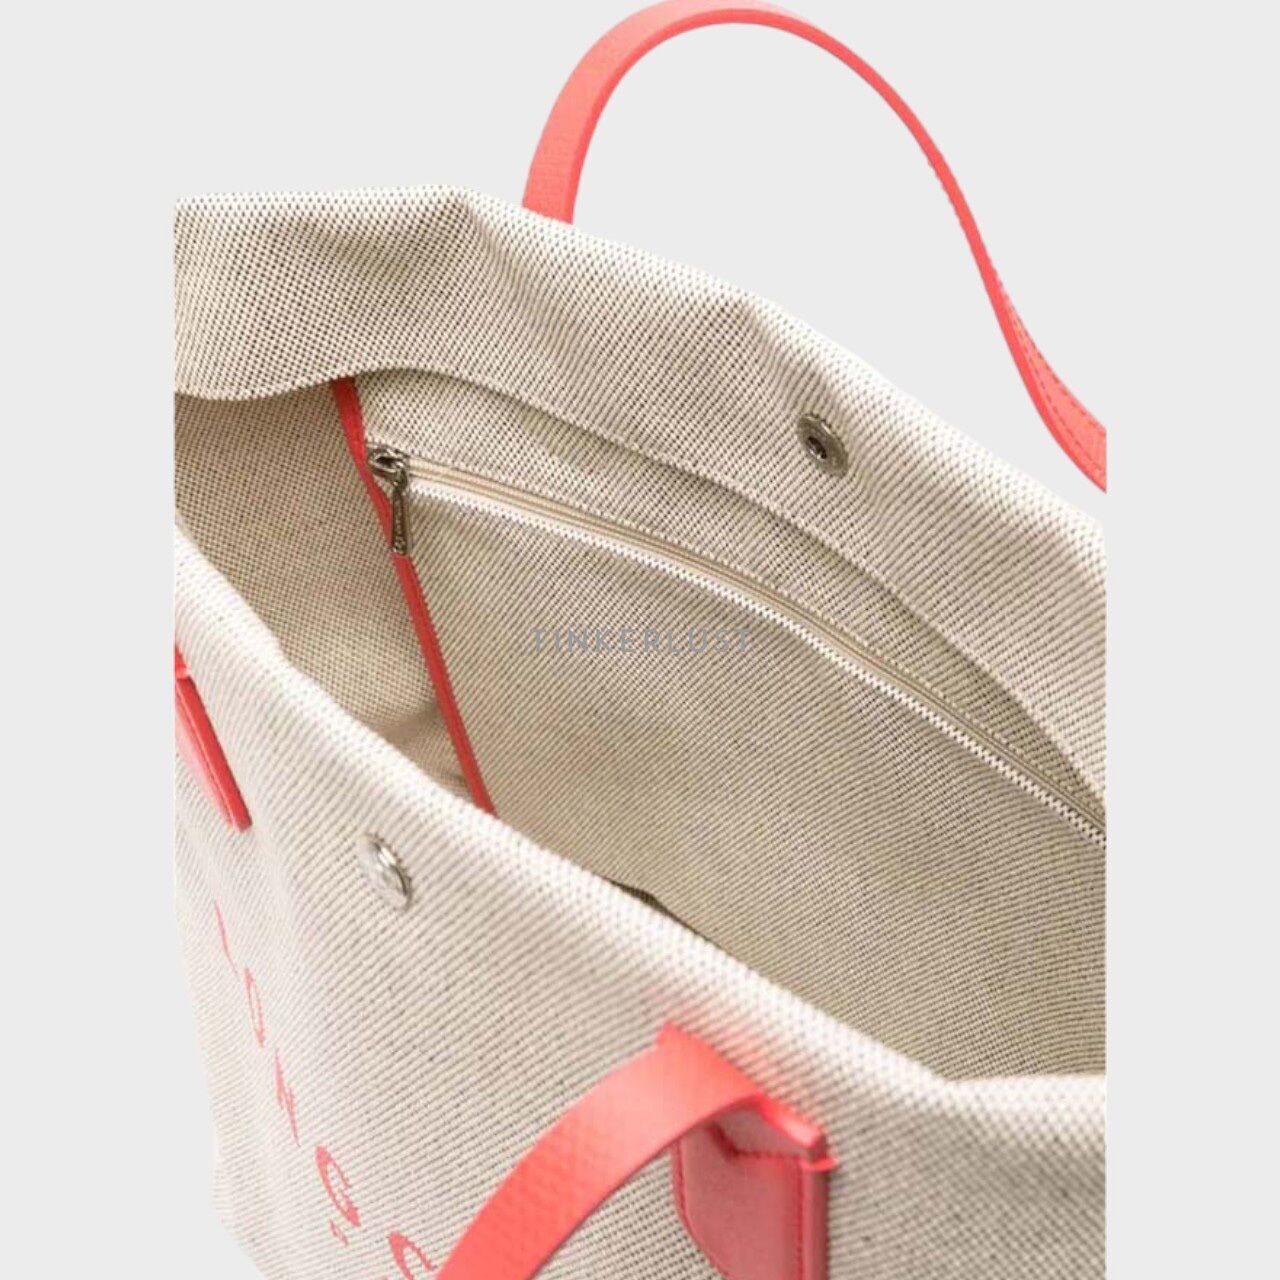 Longchamp Large Roseau In Strawberry Canvas Tote Bag